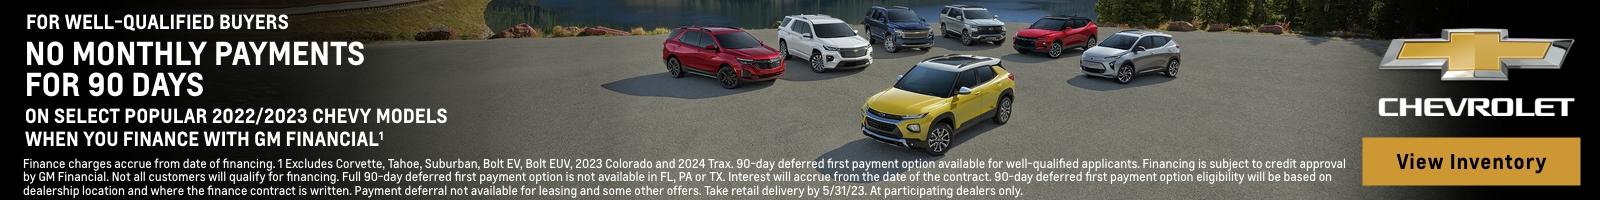 For well-qualified buyers no monthly payments for 90 days. On select popular 2022/2023 Chevy models when you finance with GM financial. Finance charges accrue from date of financing.